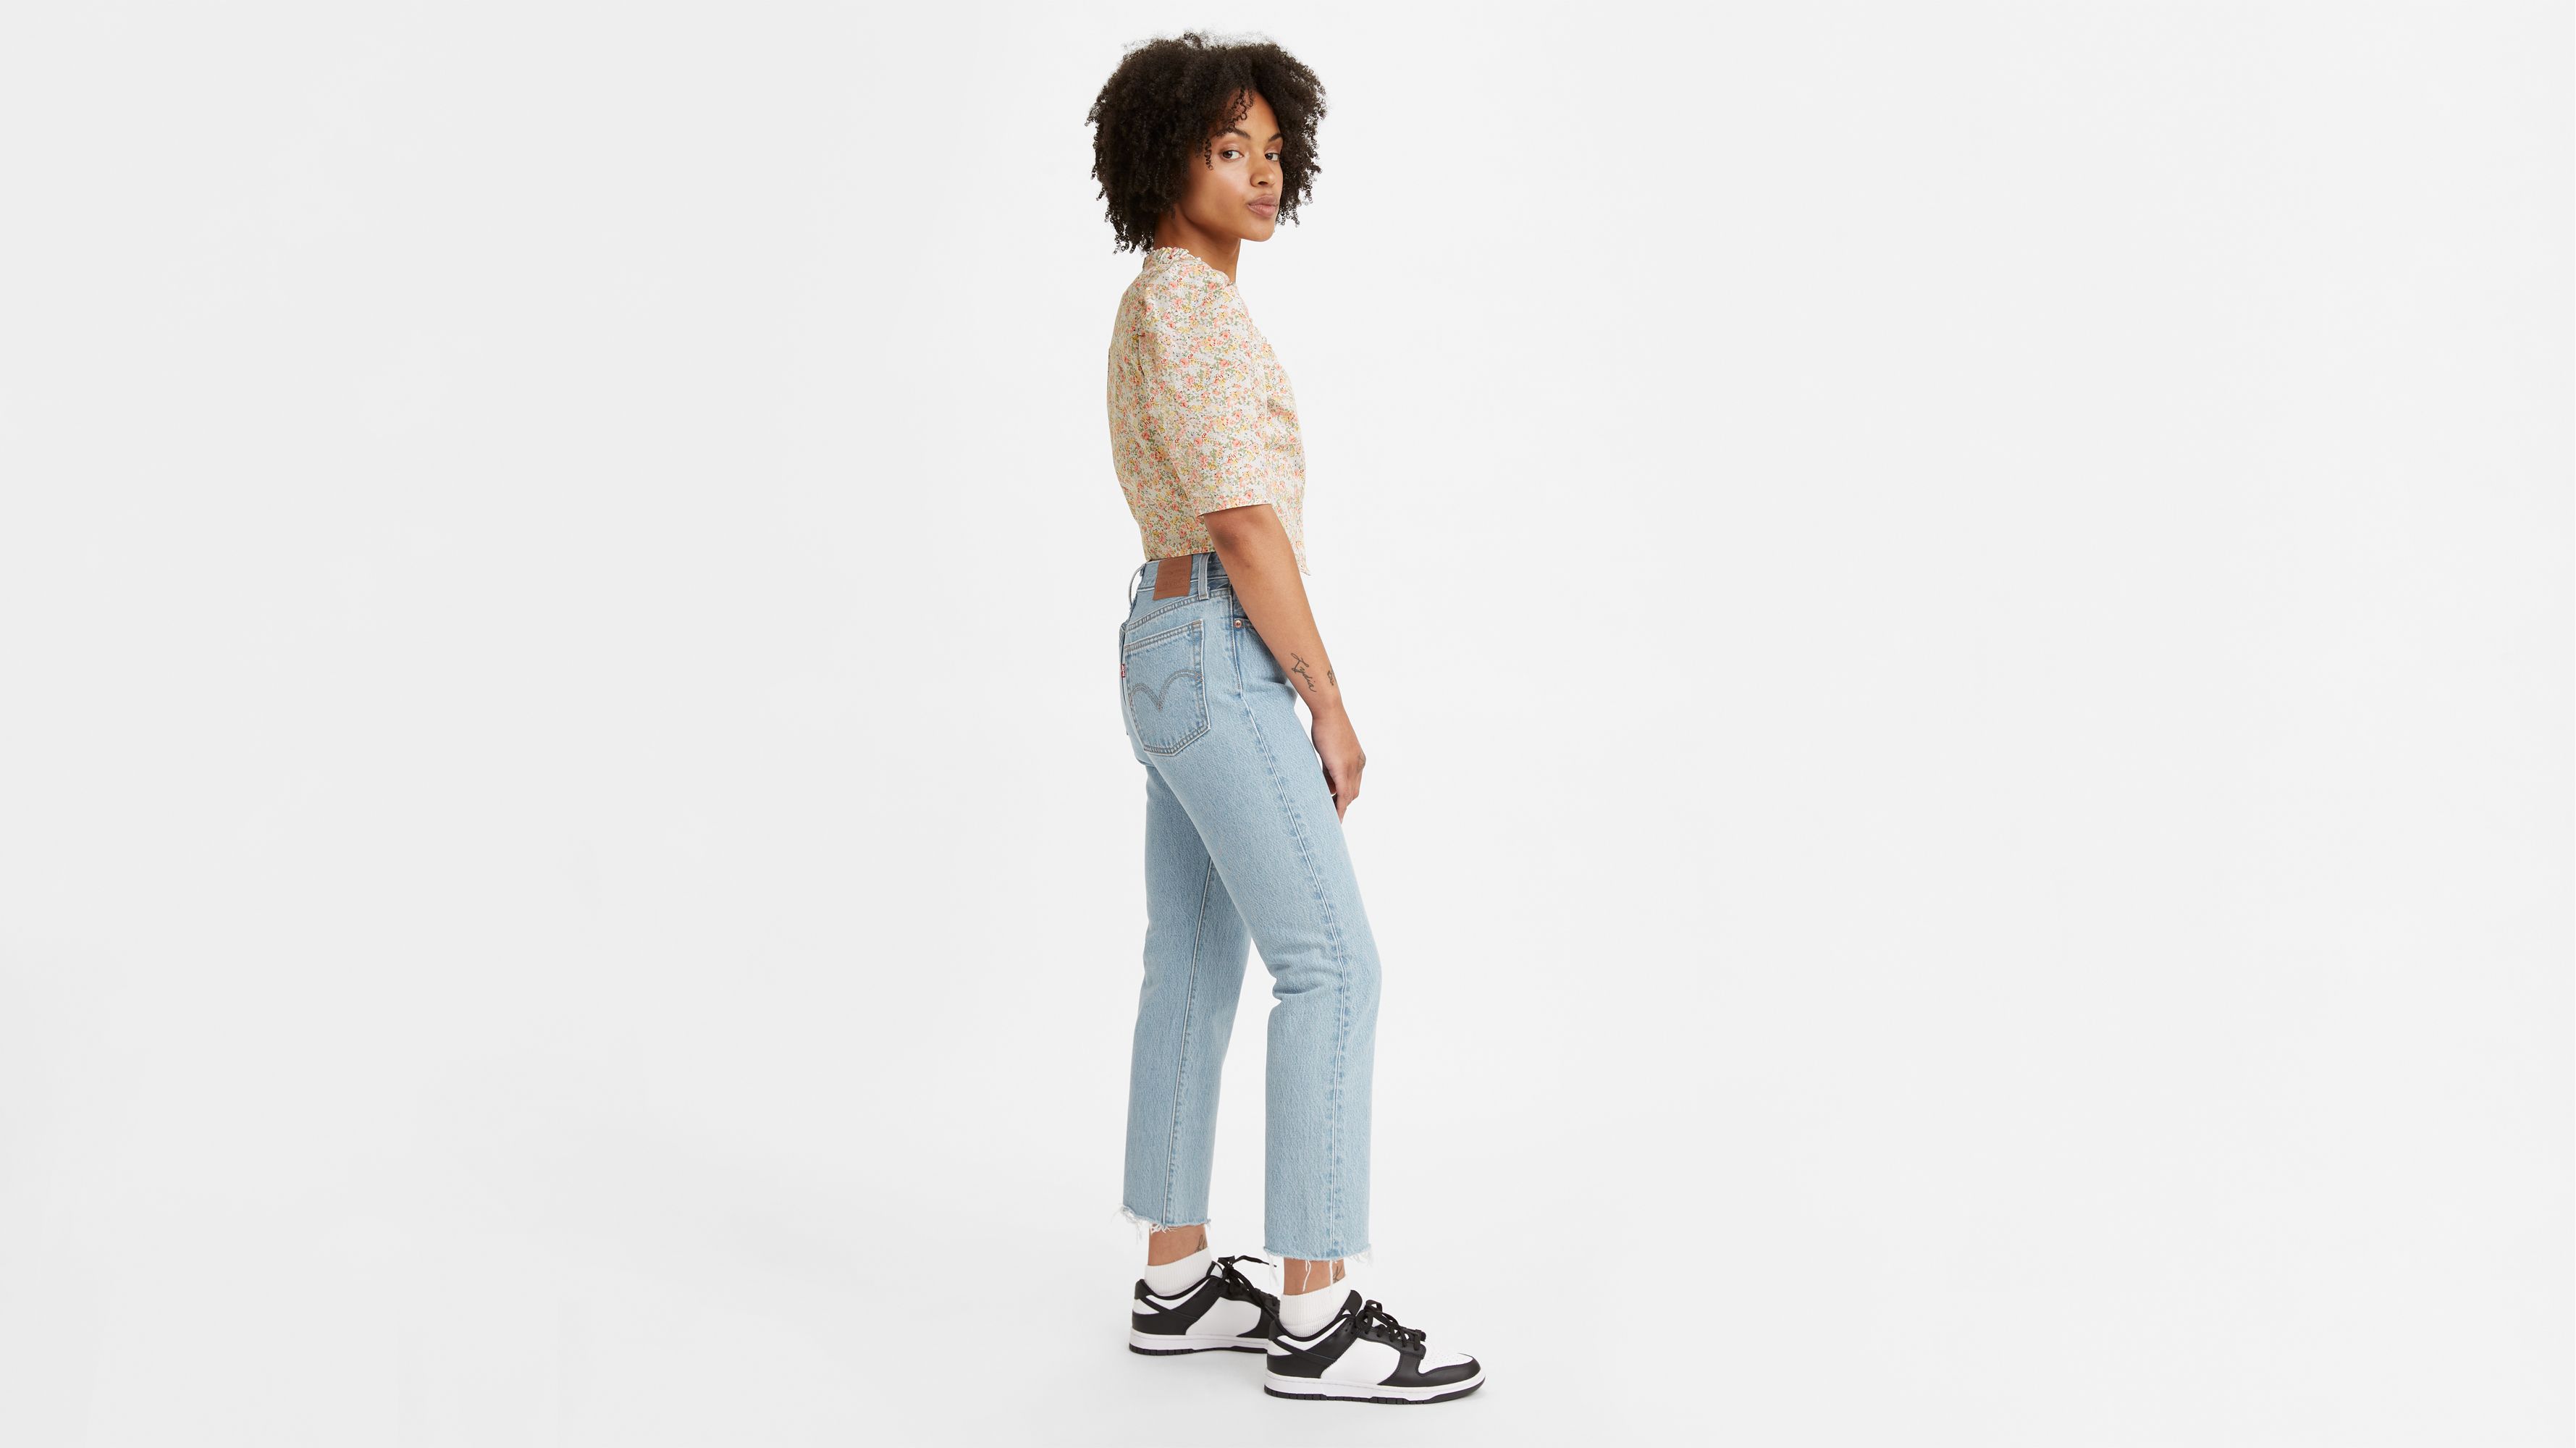 Wedgie Straight Fit Women's Jeans - Light Wash | Levi's® US